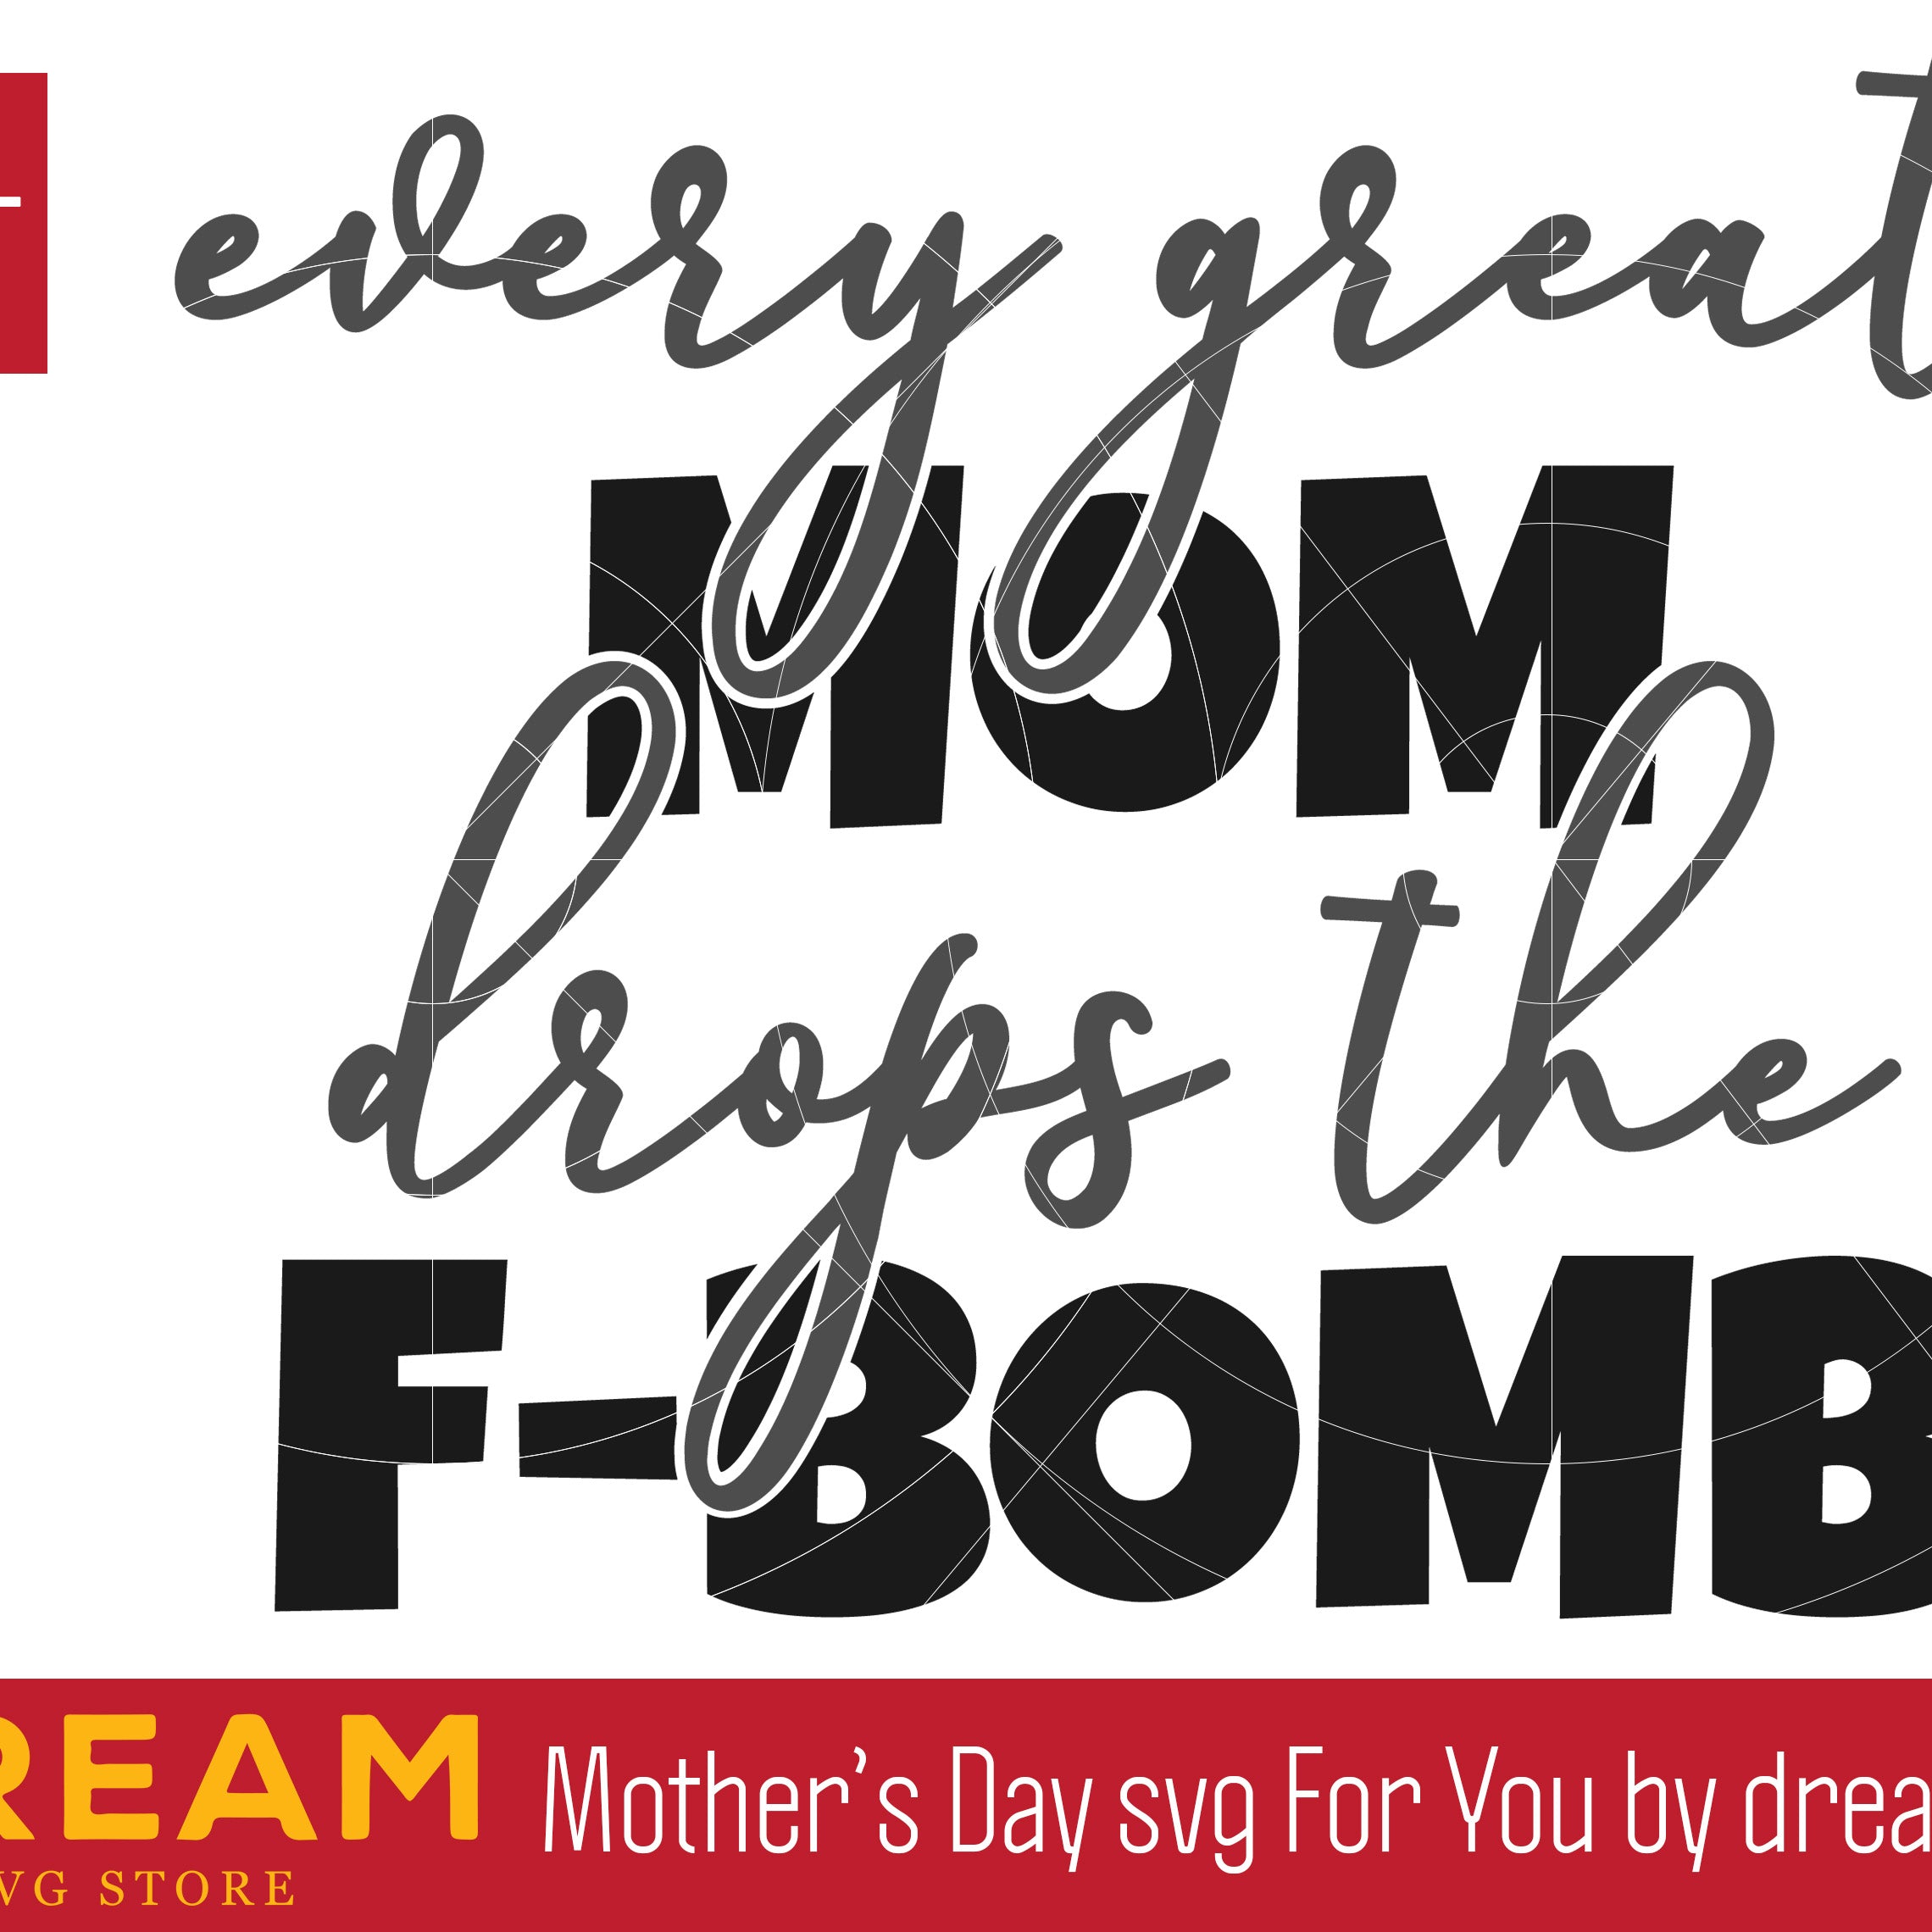 Every great mom drops the f-bomb, Mother's day svg, eps, png, dxf